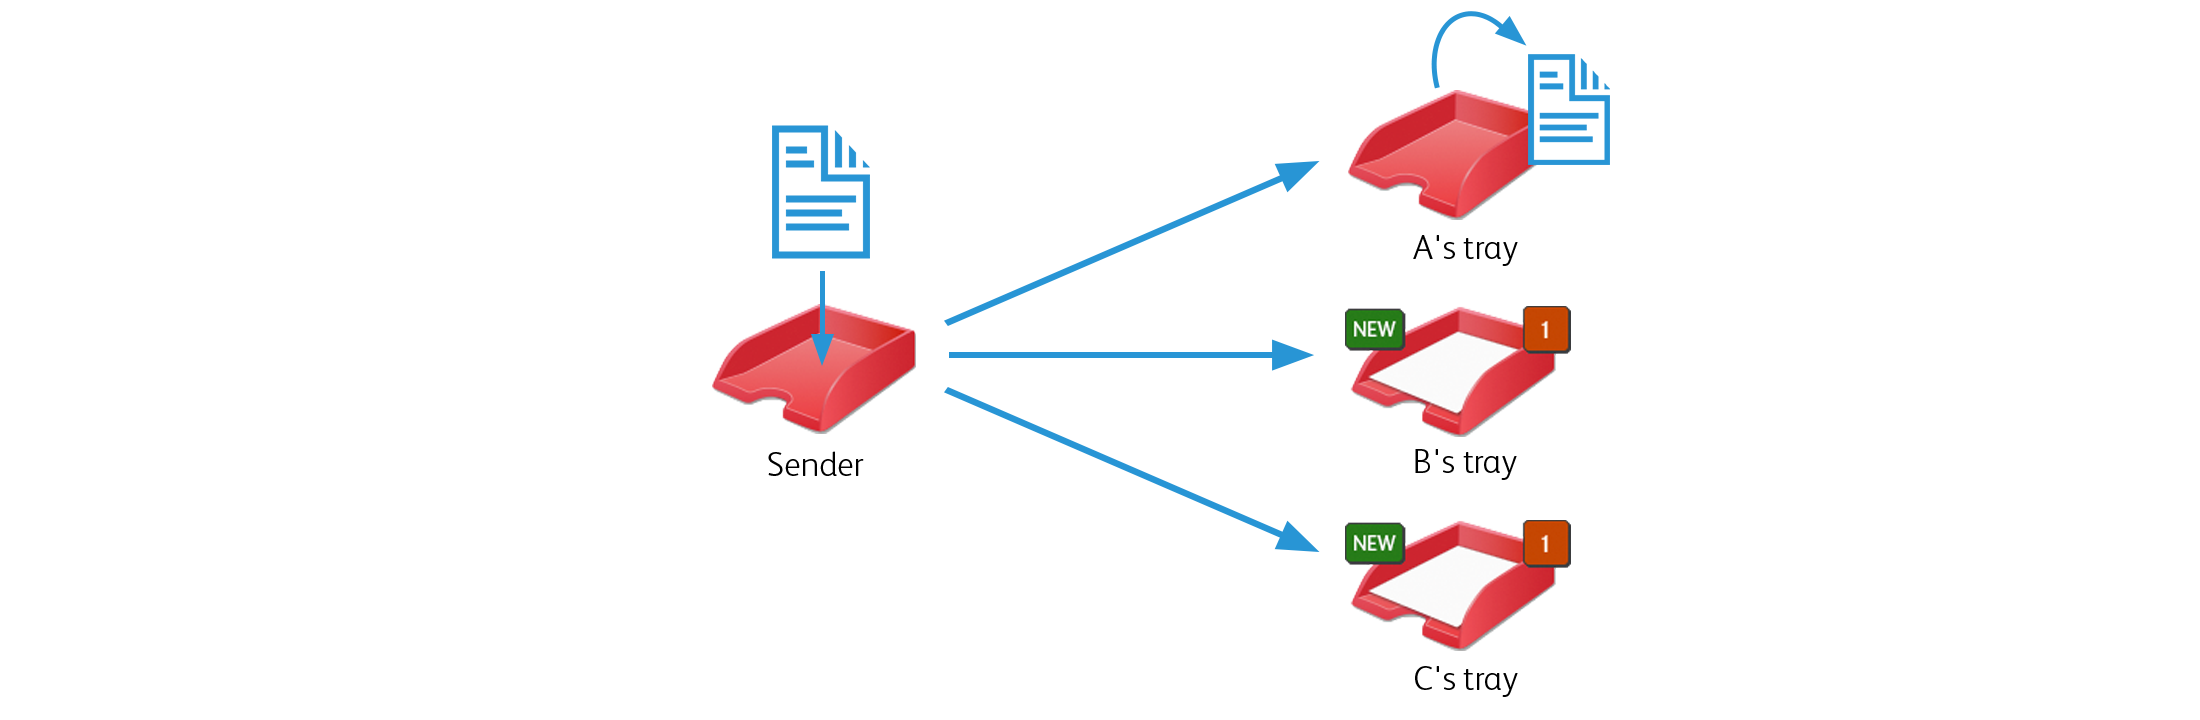 Deliver electronic documents to multiple users